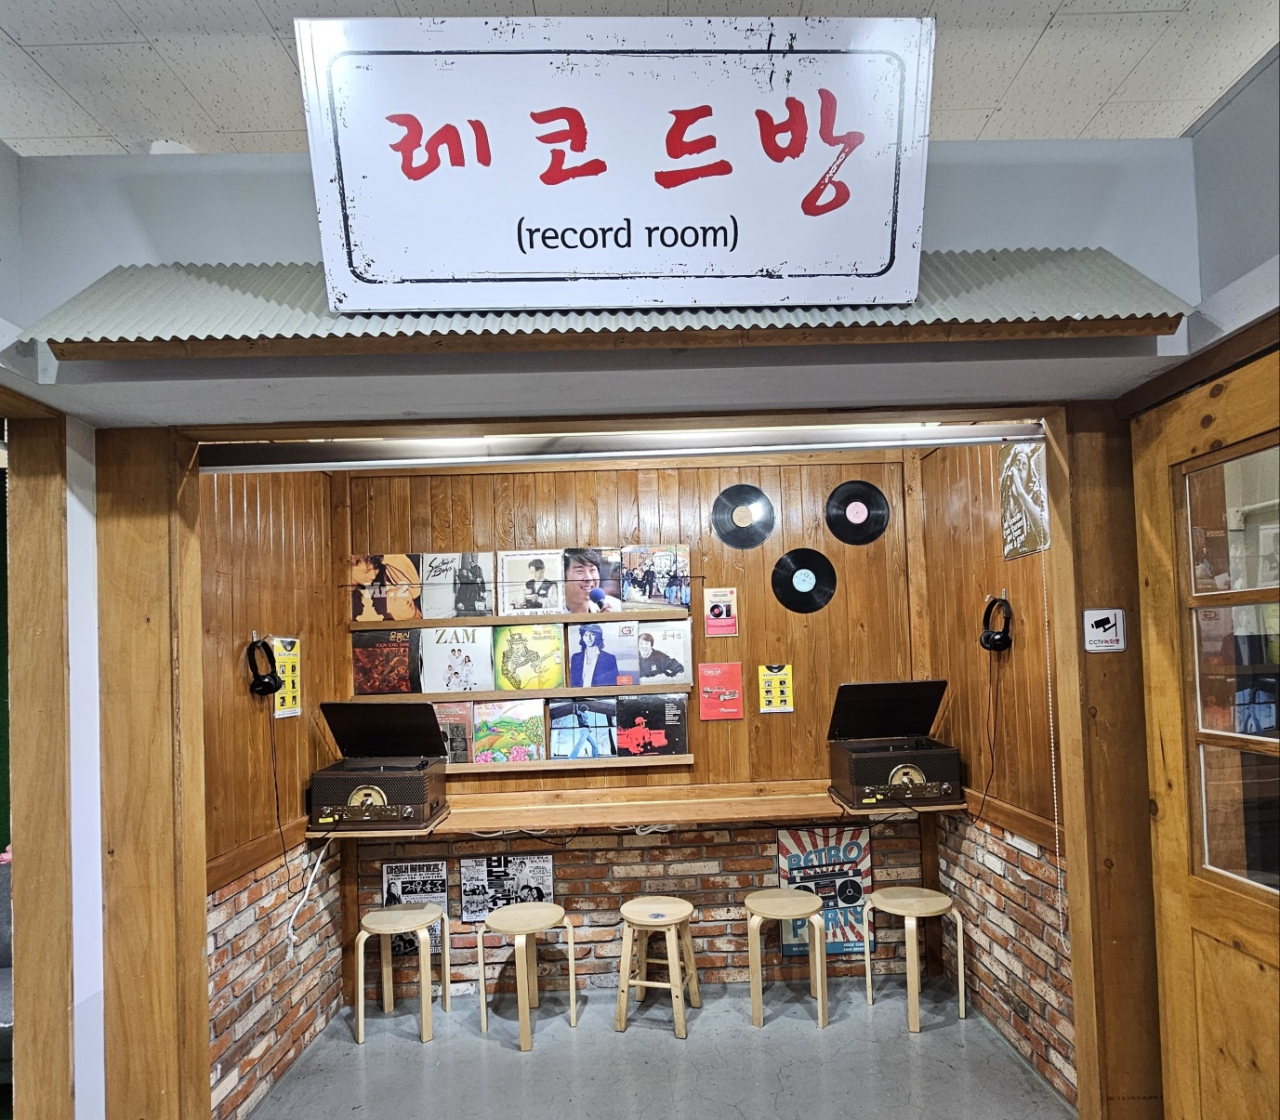 In the record room at Cheongchun 1st Street visitors can listen to the music of their choice on a turntable. (Lee Yoon-seo/The Korea Herald)